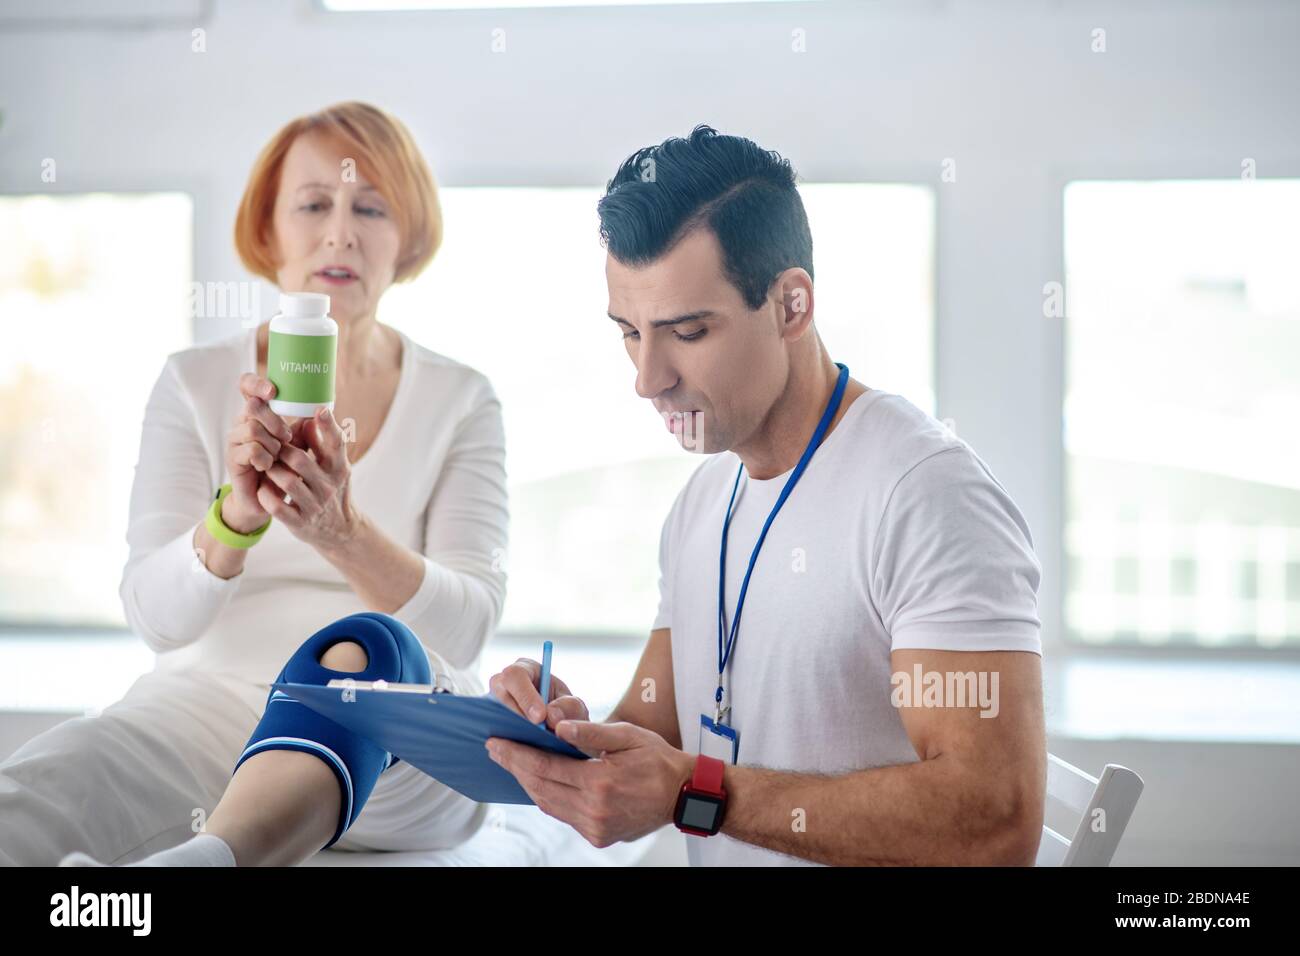 Nice professional male doctor writing a prescription Stock Photo